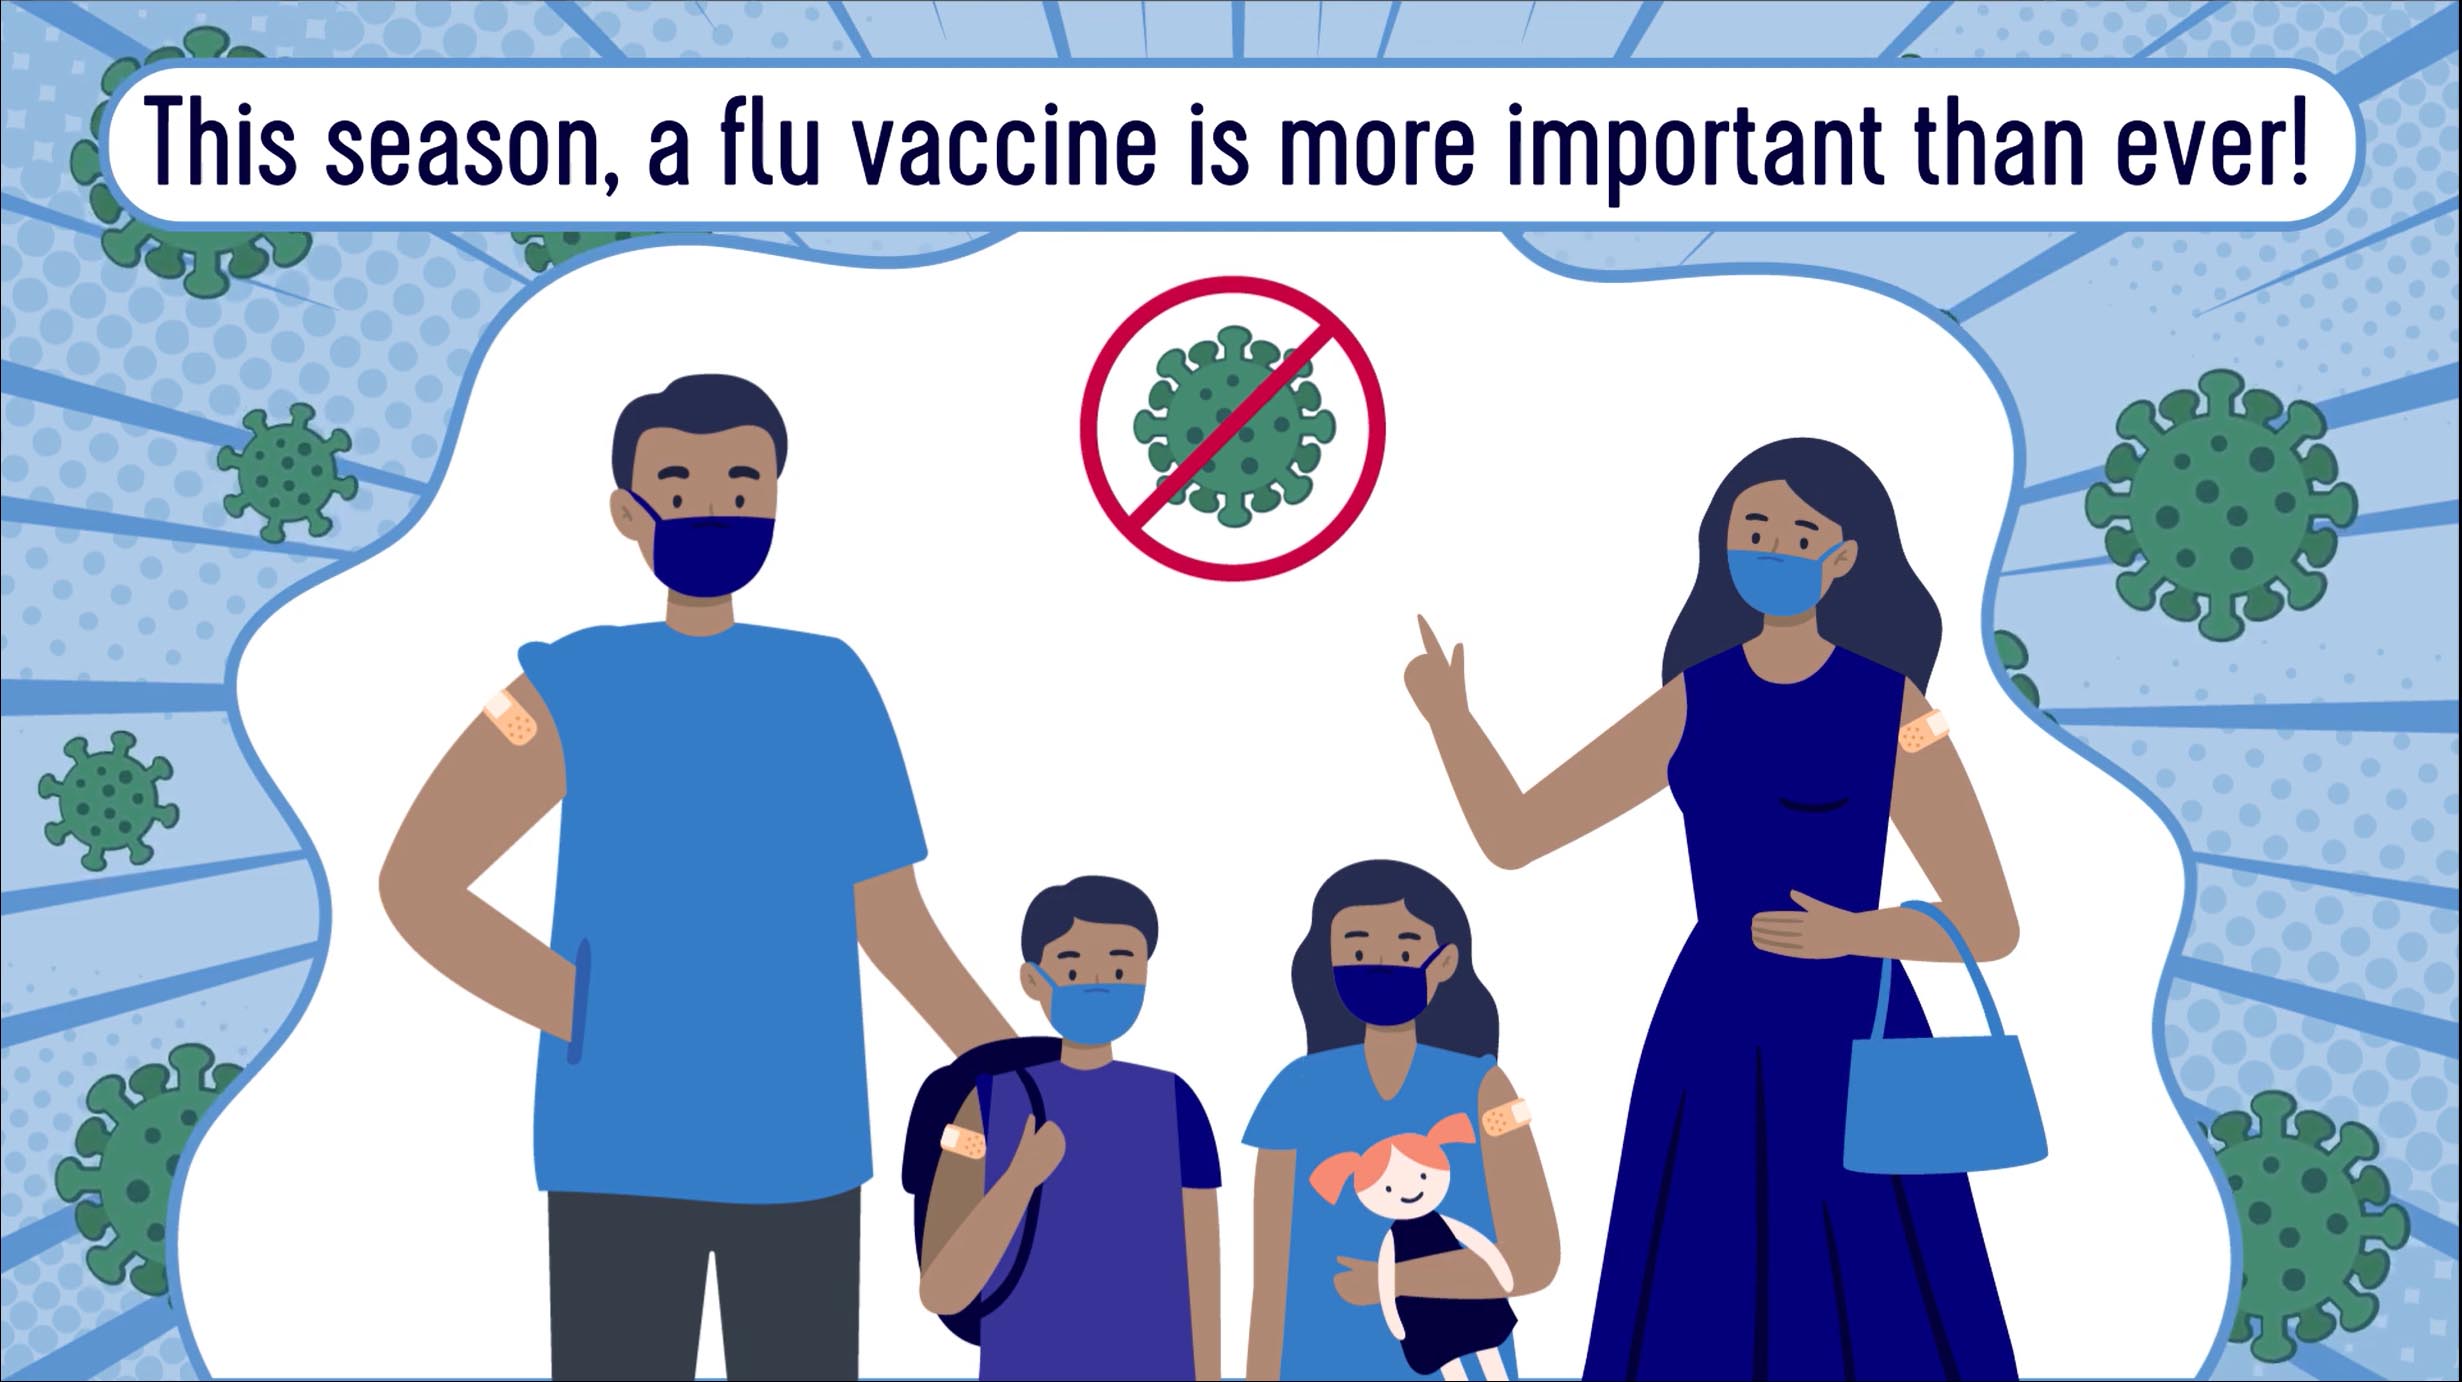 Health Education: Why It Is Important To Take The Flu Vaccine